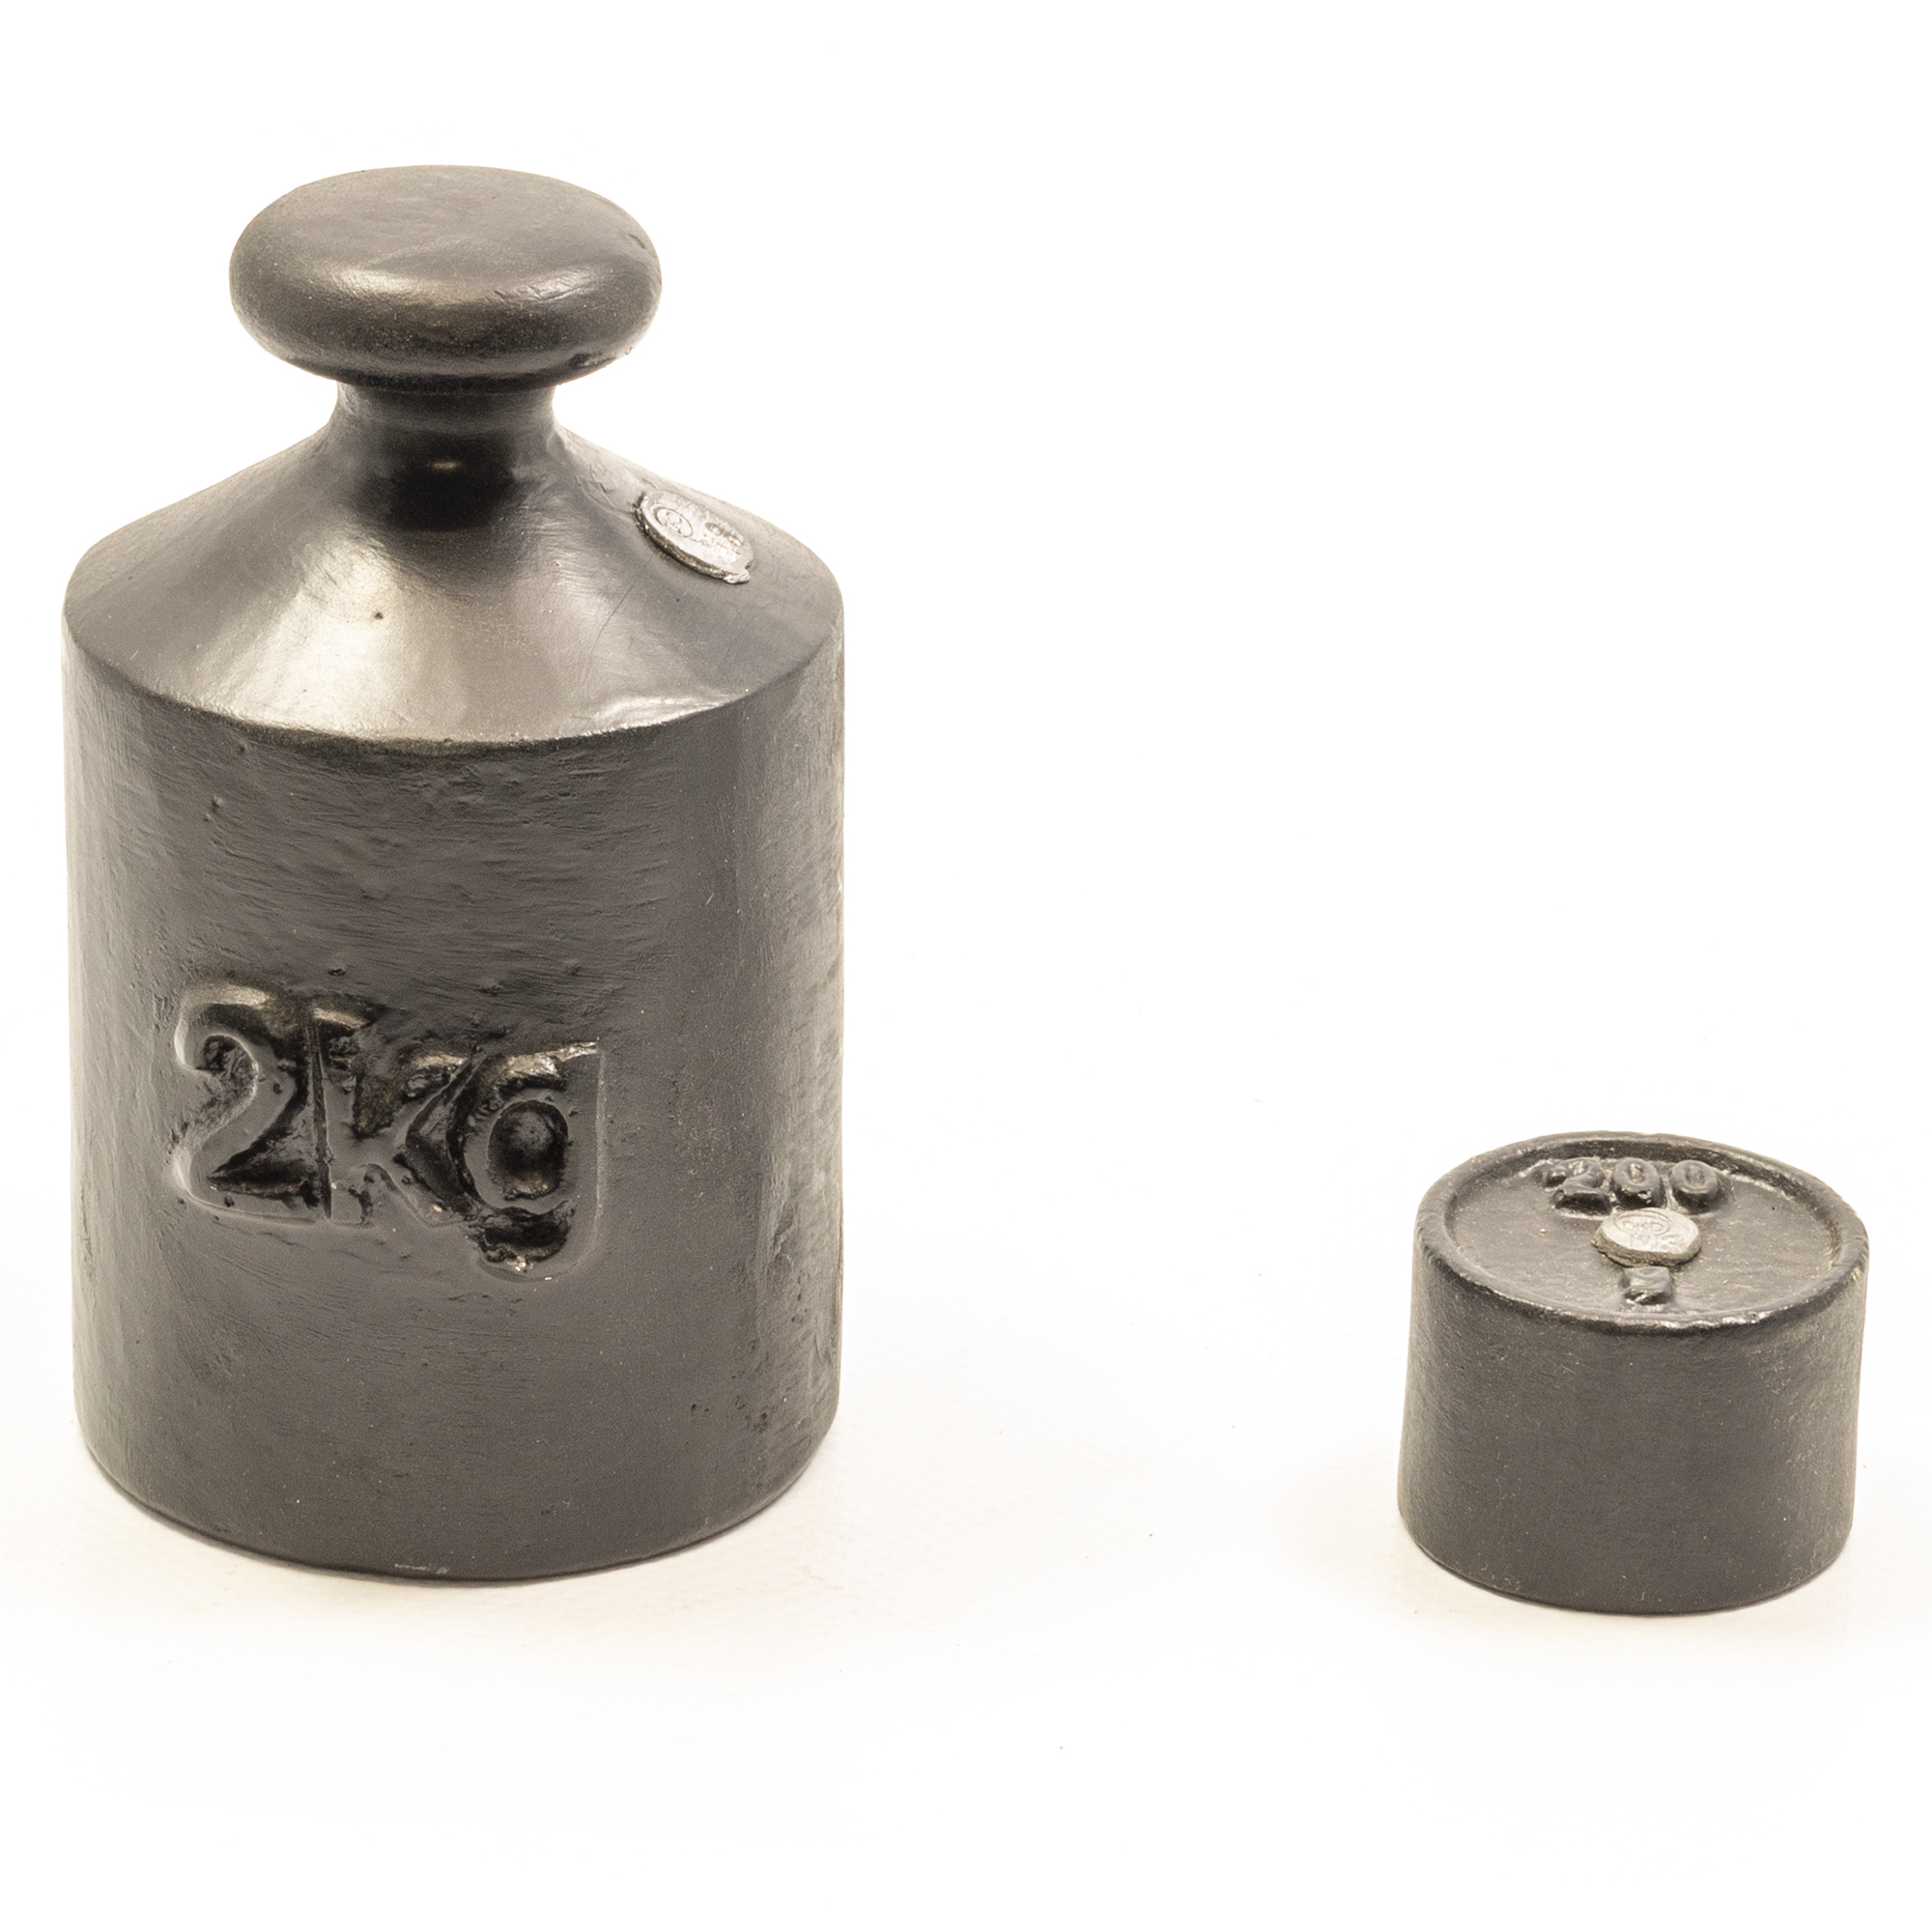 Individual weights M3, cylindrical shape, lacquered cast iron